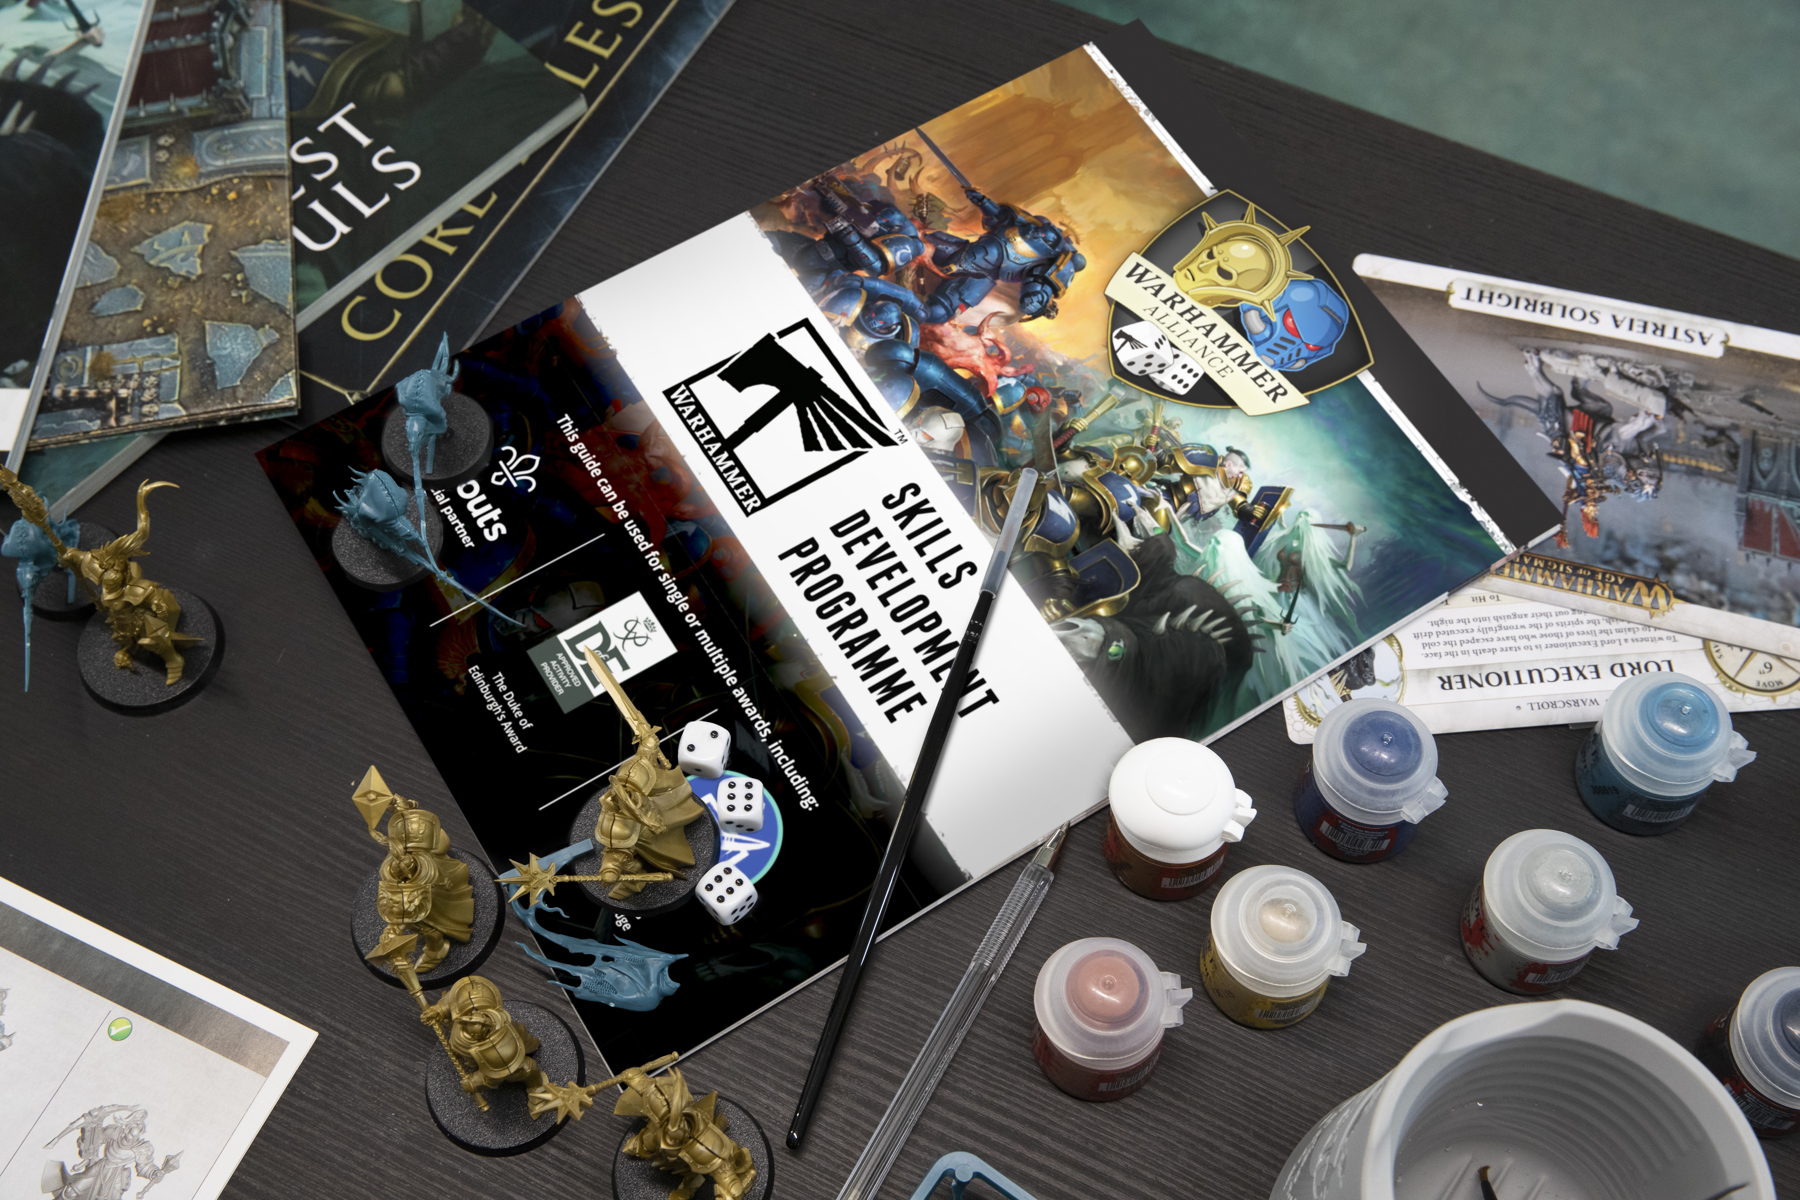 Warhammer Skills booklet on a table with Warhammer figurines, paint brushes and paint pots